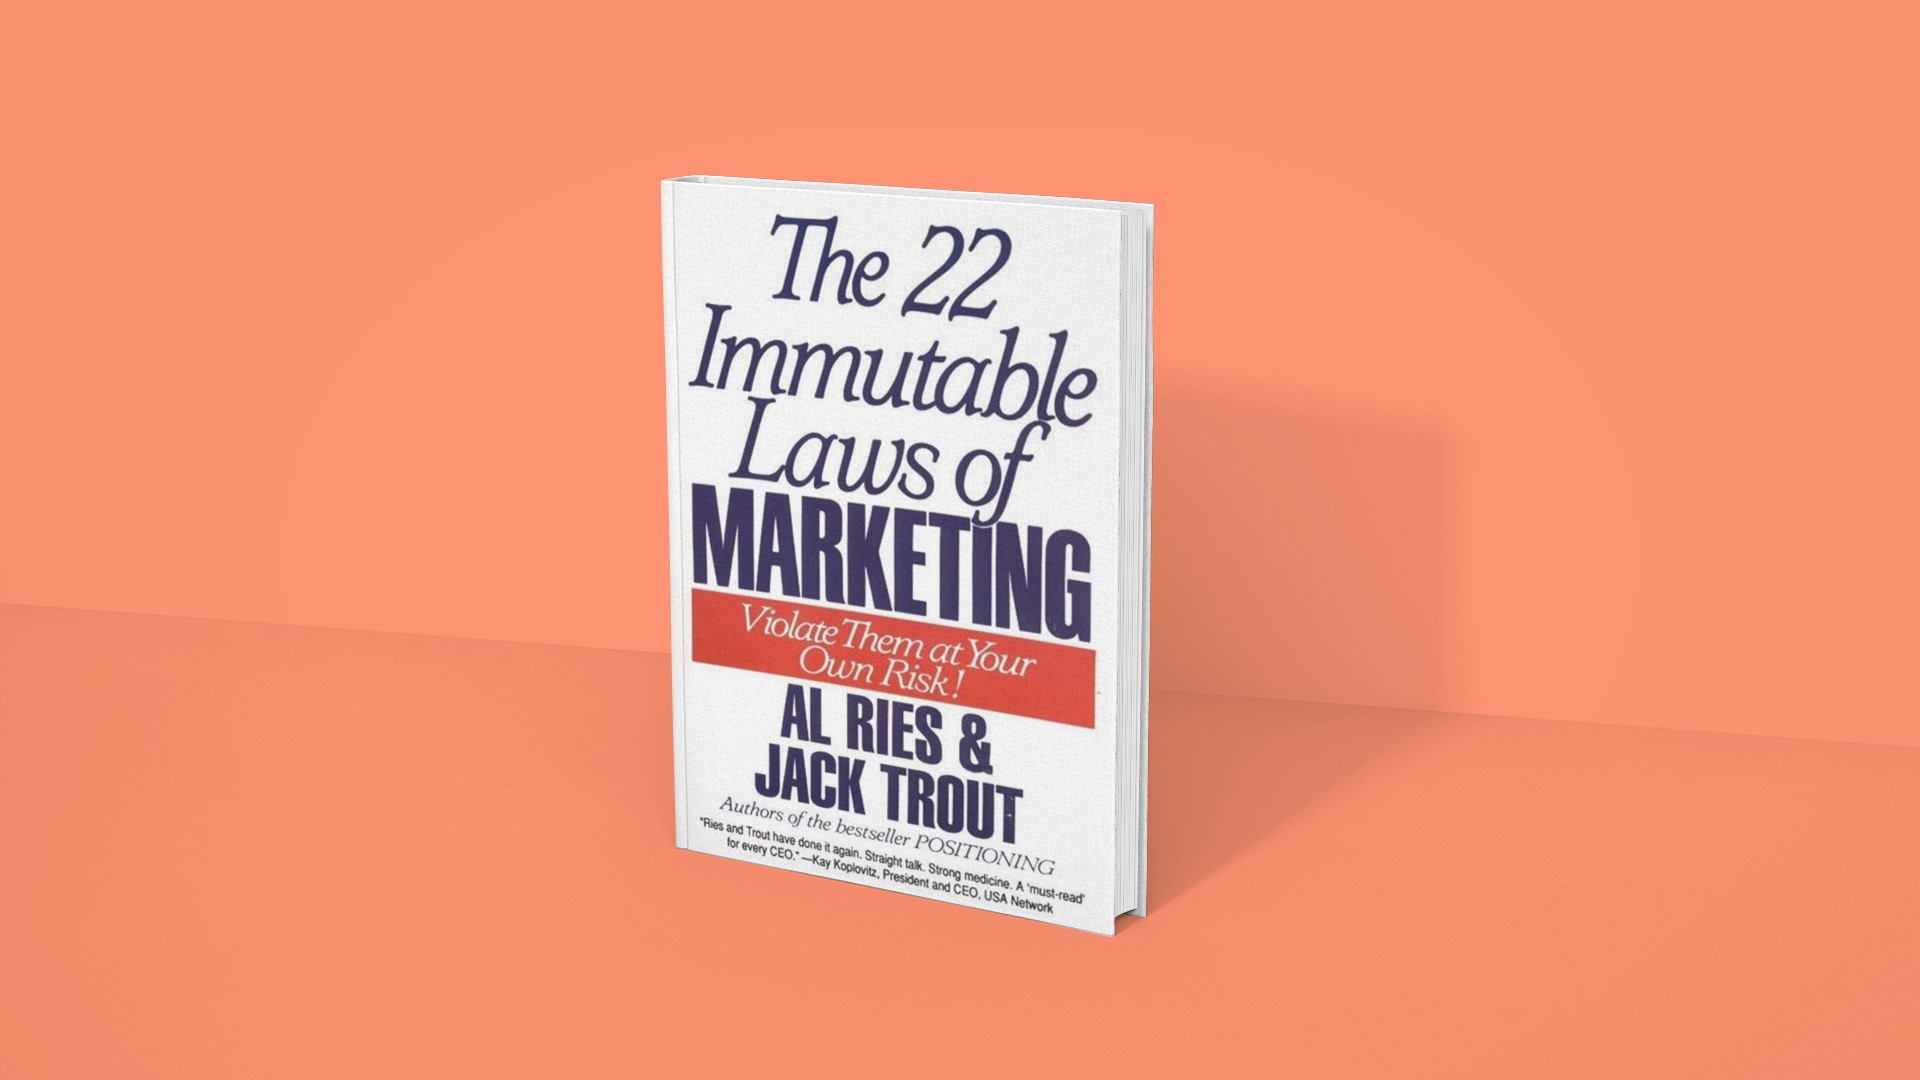 The 22 Immutable Laws of Marketing - Al Ries and Jack Trout